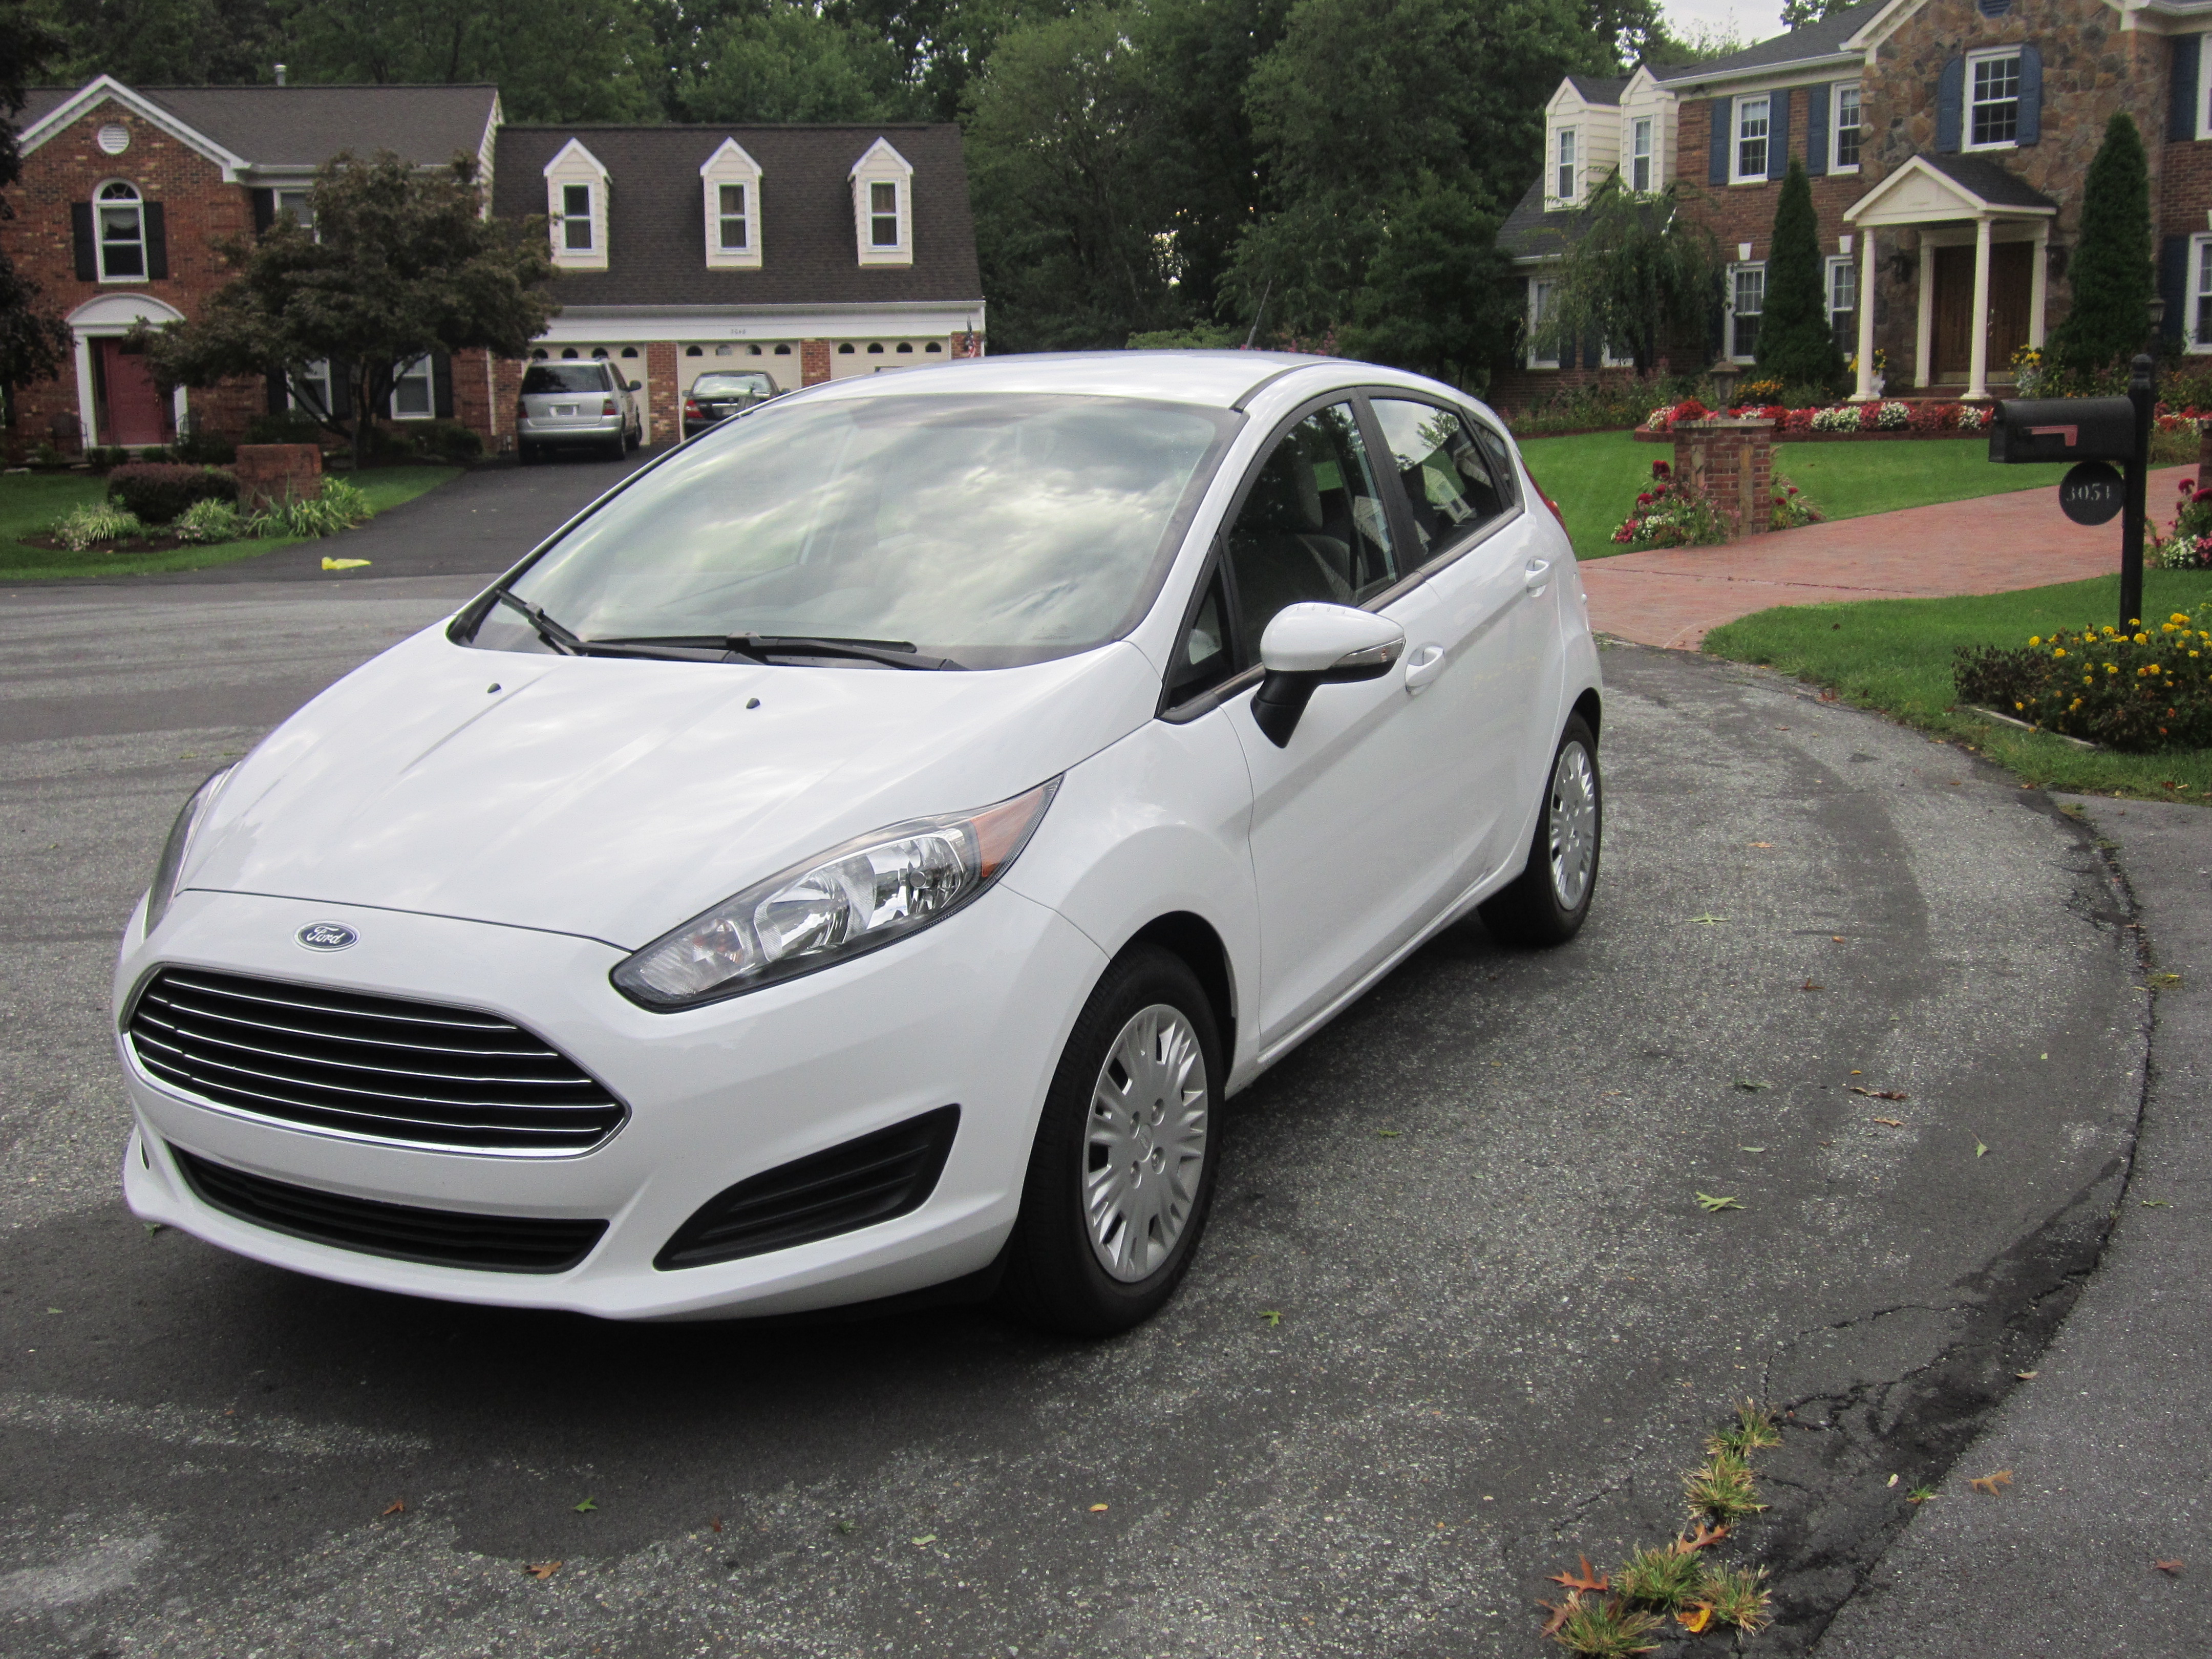 Car Report: Fiesta’s Ecoboost gives good gas mileage, surprising punch